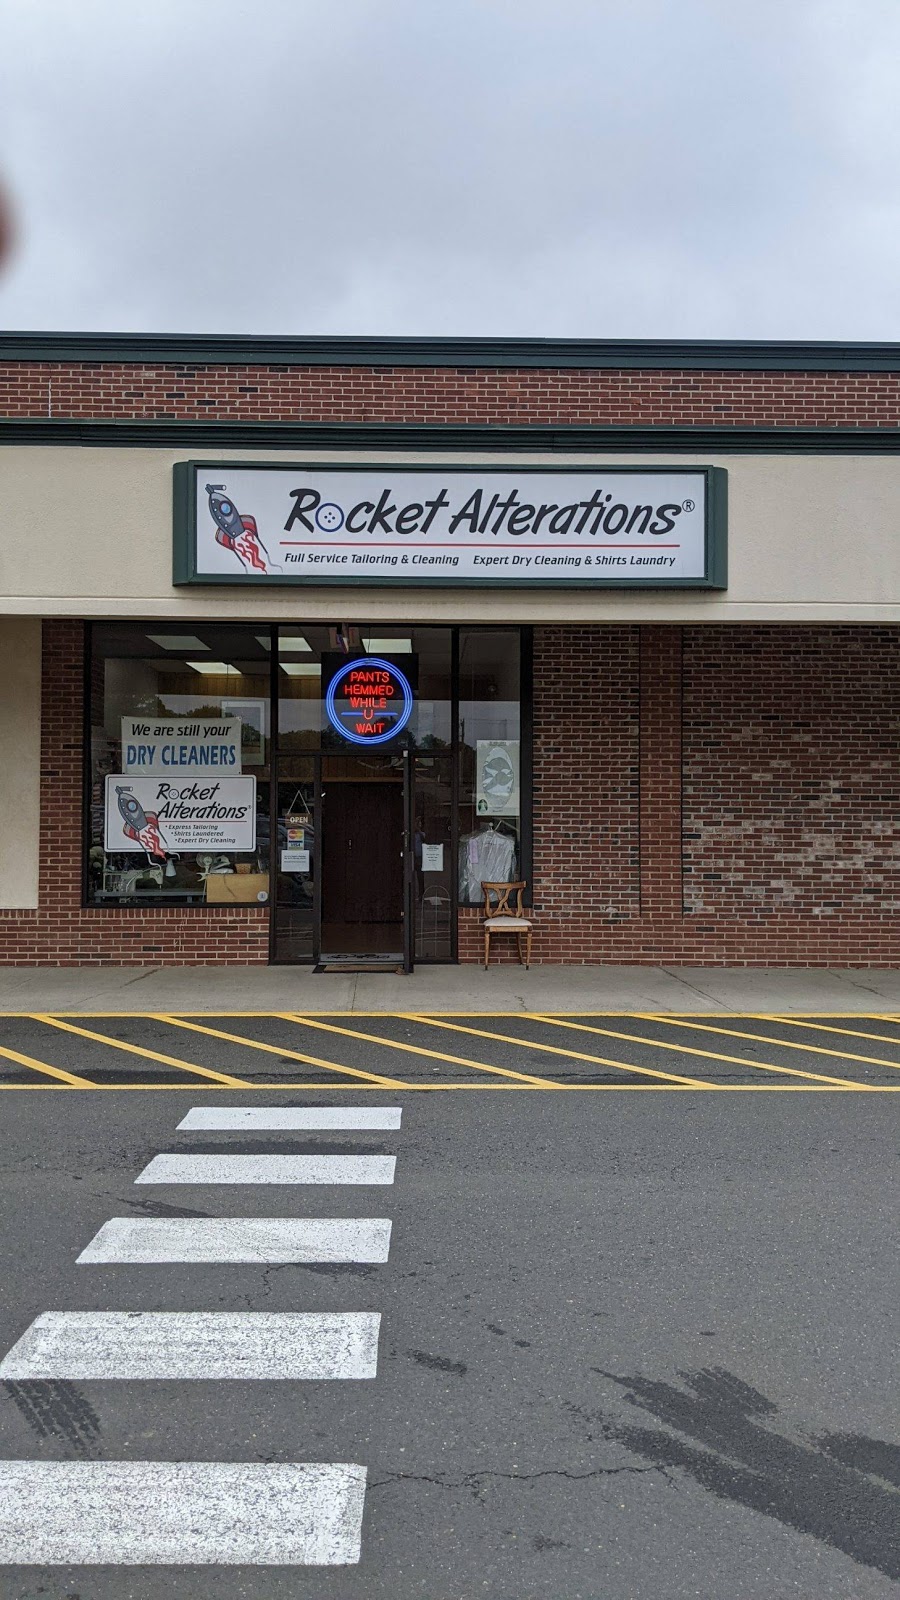 Rocket Alterations: Newfield | 597 Newfield Ave, Stamford, CT 06905 | Phone: (203) 323-0026